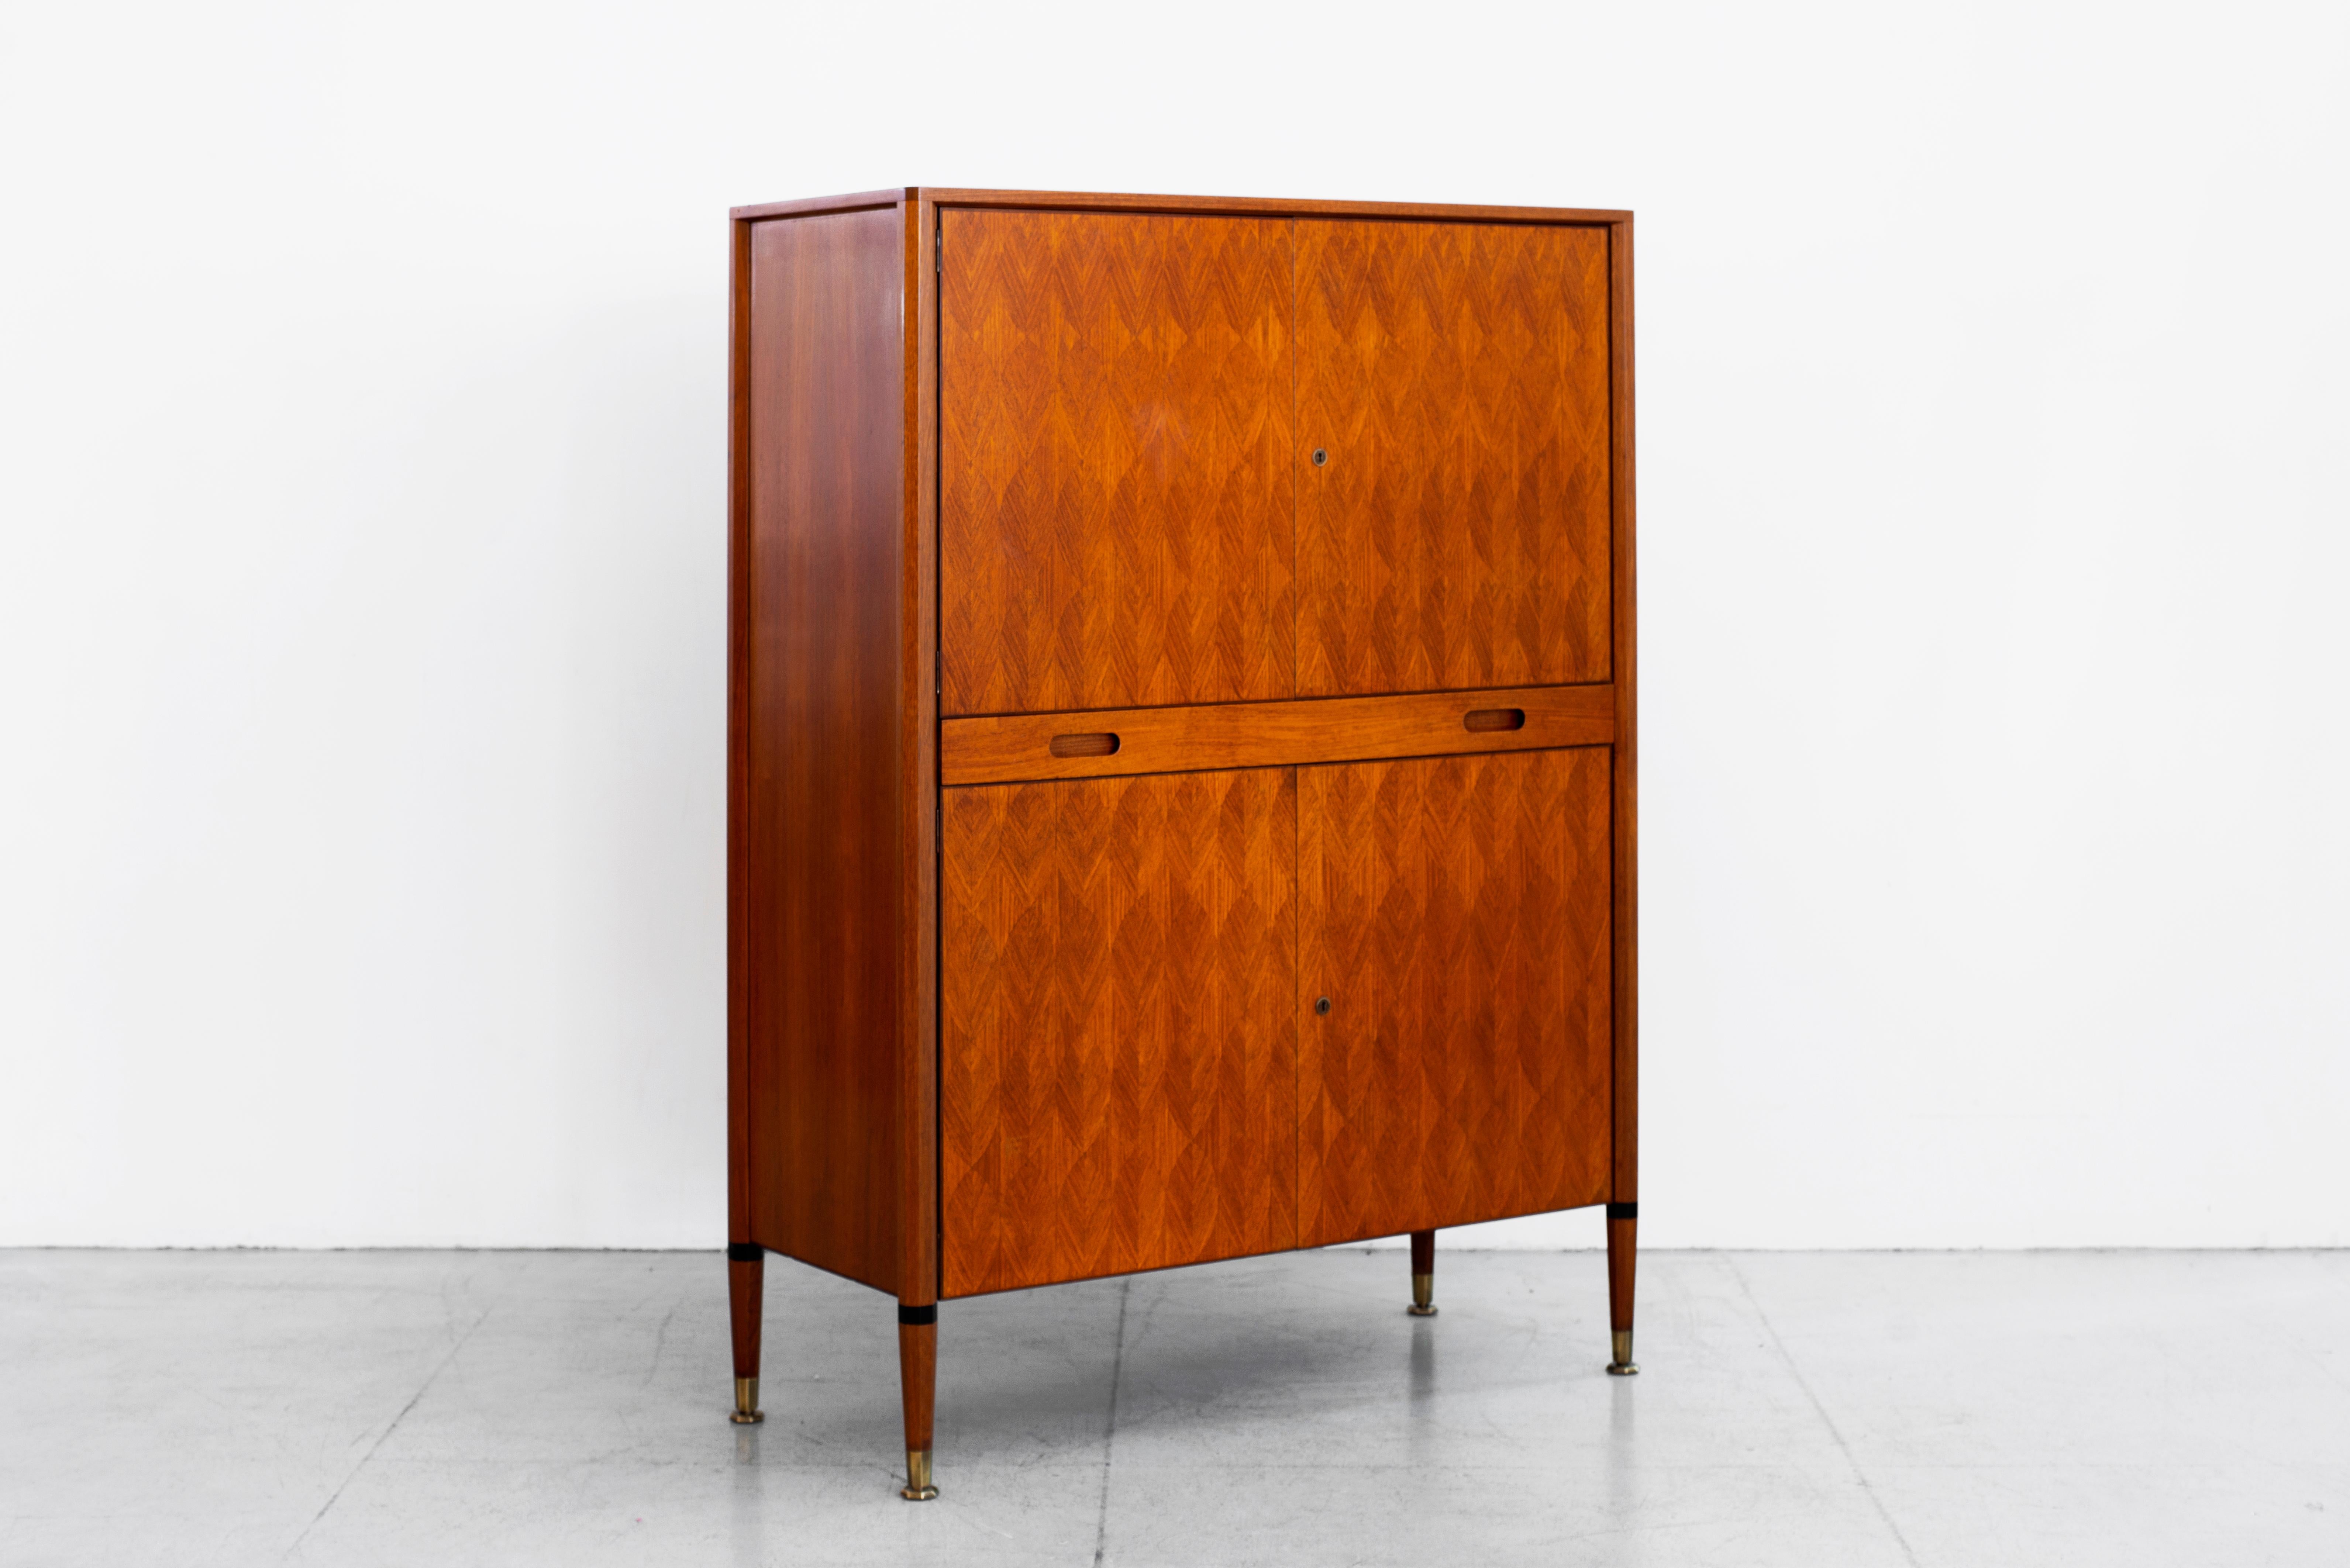 Gorgeous cabinet by Paolo Buffa, circa 1940s
Wonderful craftsmanship in patterned rosewood - Four doors and one pull out drawer that doubles as a surface with a sliding mechanism. 
Tapered legs with inlay 
Brass feet with original key.